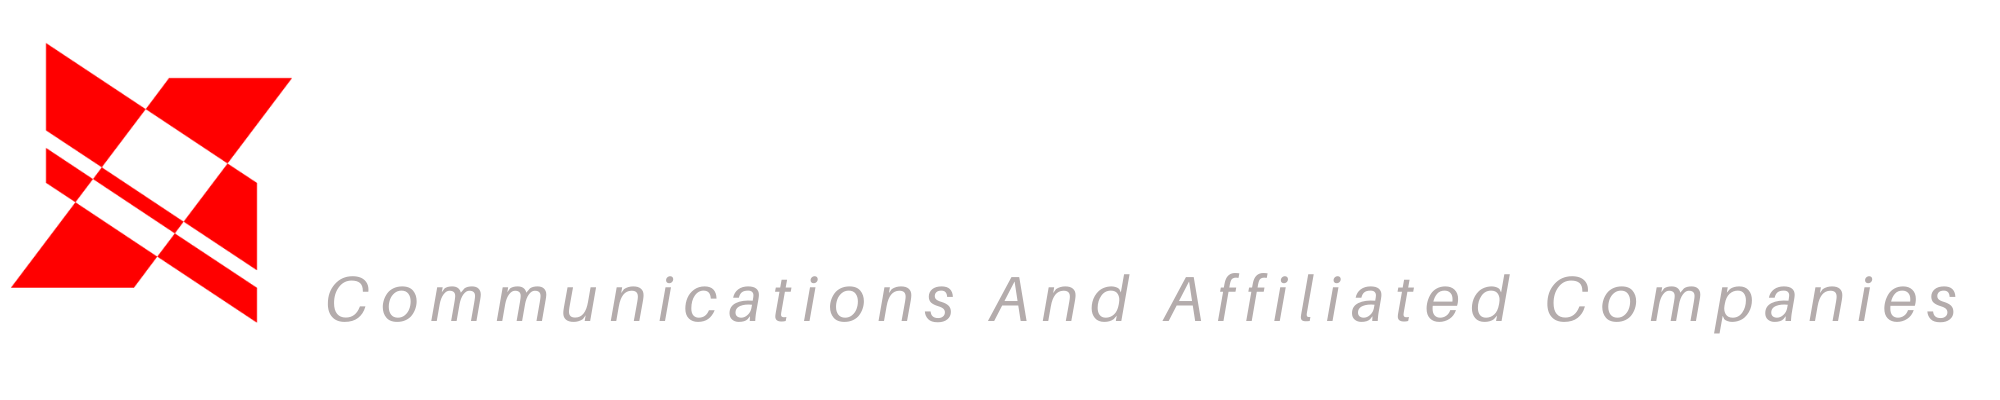 Clark-Ritchotte Communications and Affiliated Companies